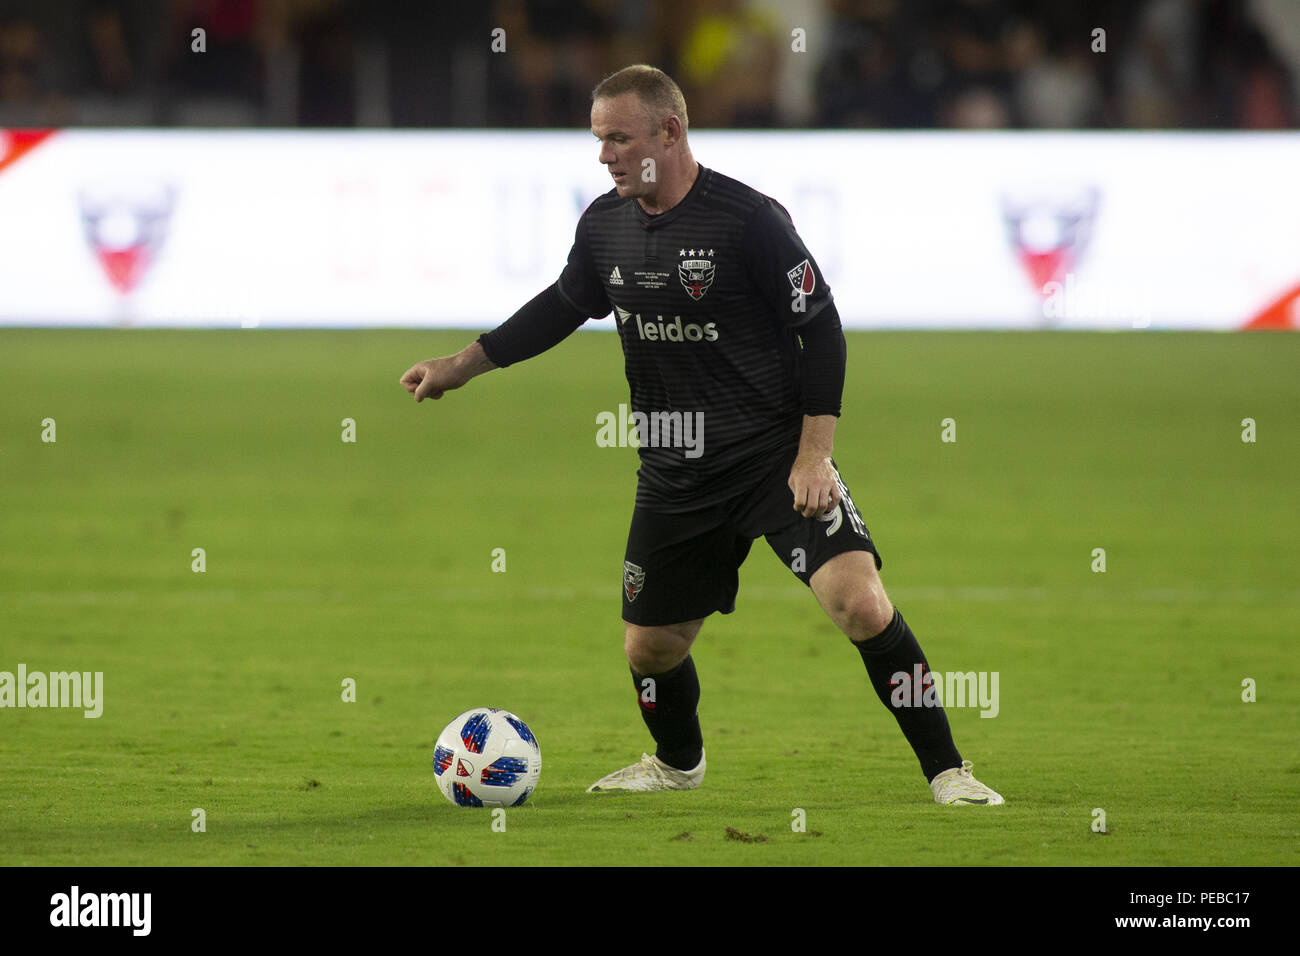 Washington, District of Columbia, USA. 14th July, 2018. D.C. United forward Wayne Rooney (9) dribbles during the game between D.C. United and Vancouver Whitecaps at Audi Filed in Washington, DC on July 14, 2018. D.C. This is D.C. United's first game at Audi Field. Credit: Alex Edelman/ZUMA Wire/Alamy Live News Stock Photo